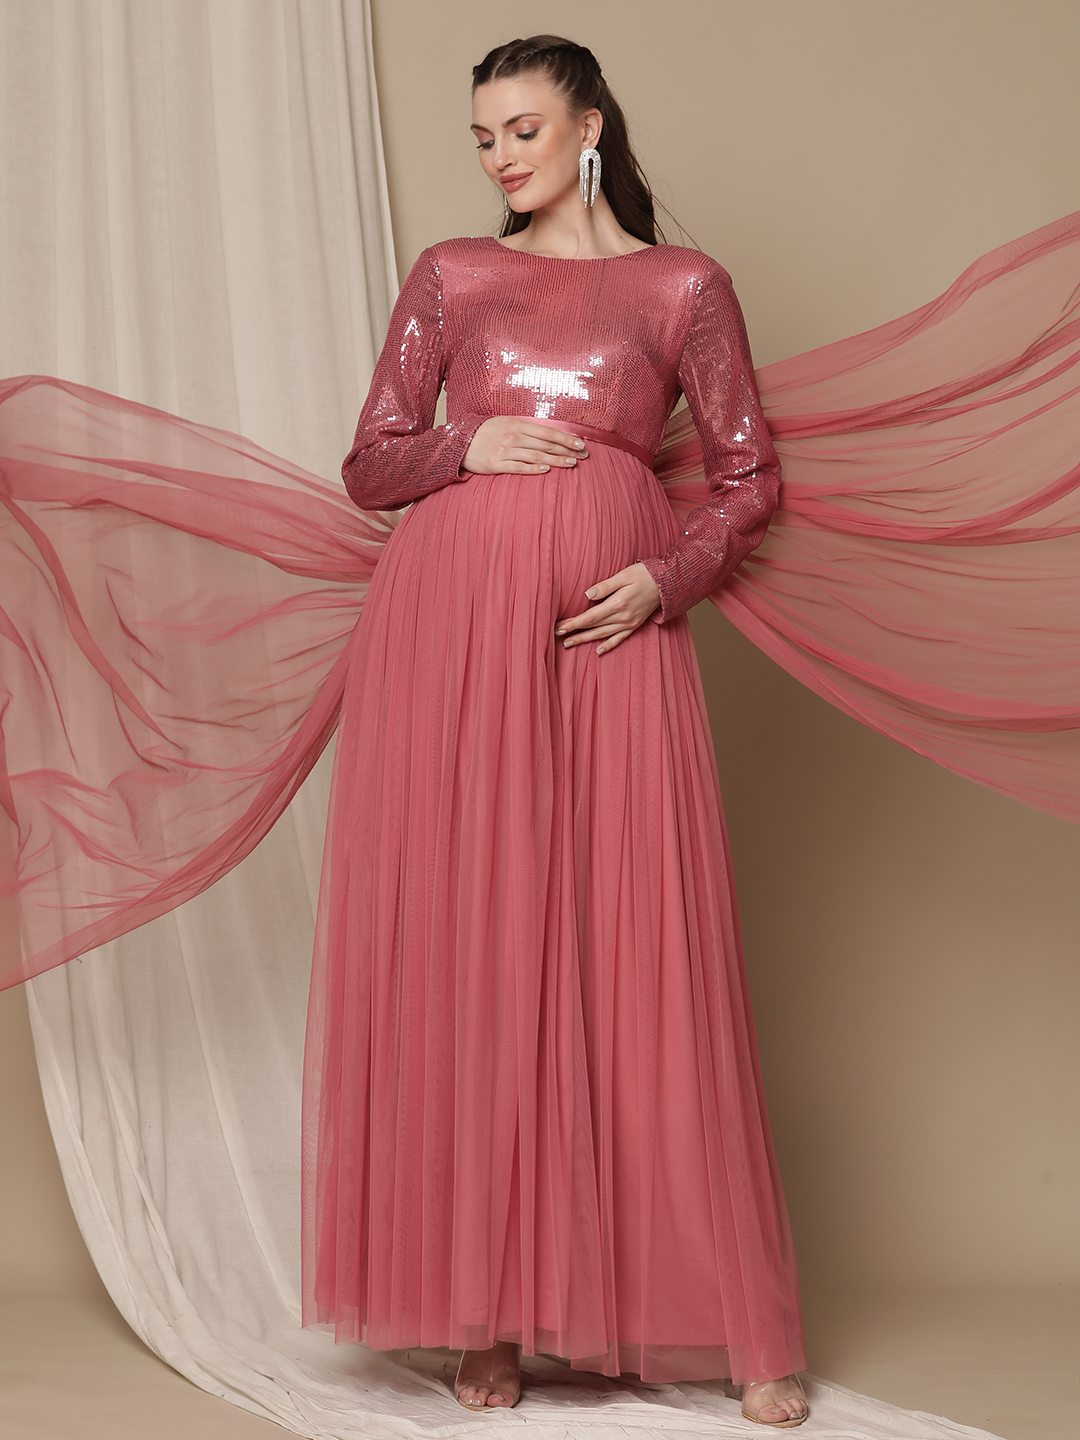 Oscar Champagne Gold Satin Maternity Gown for Photo Shoot and Baby Sho –  sharon rose custom